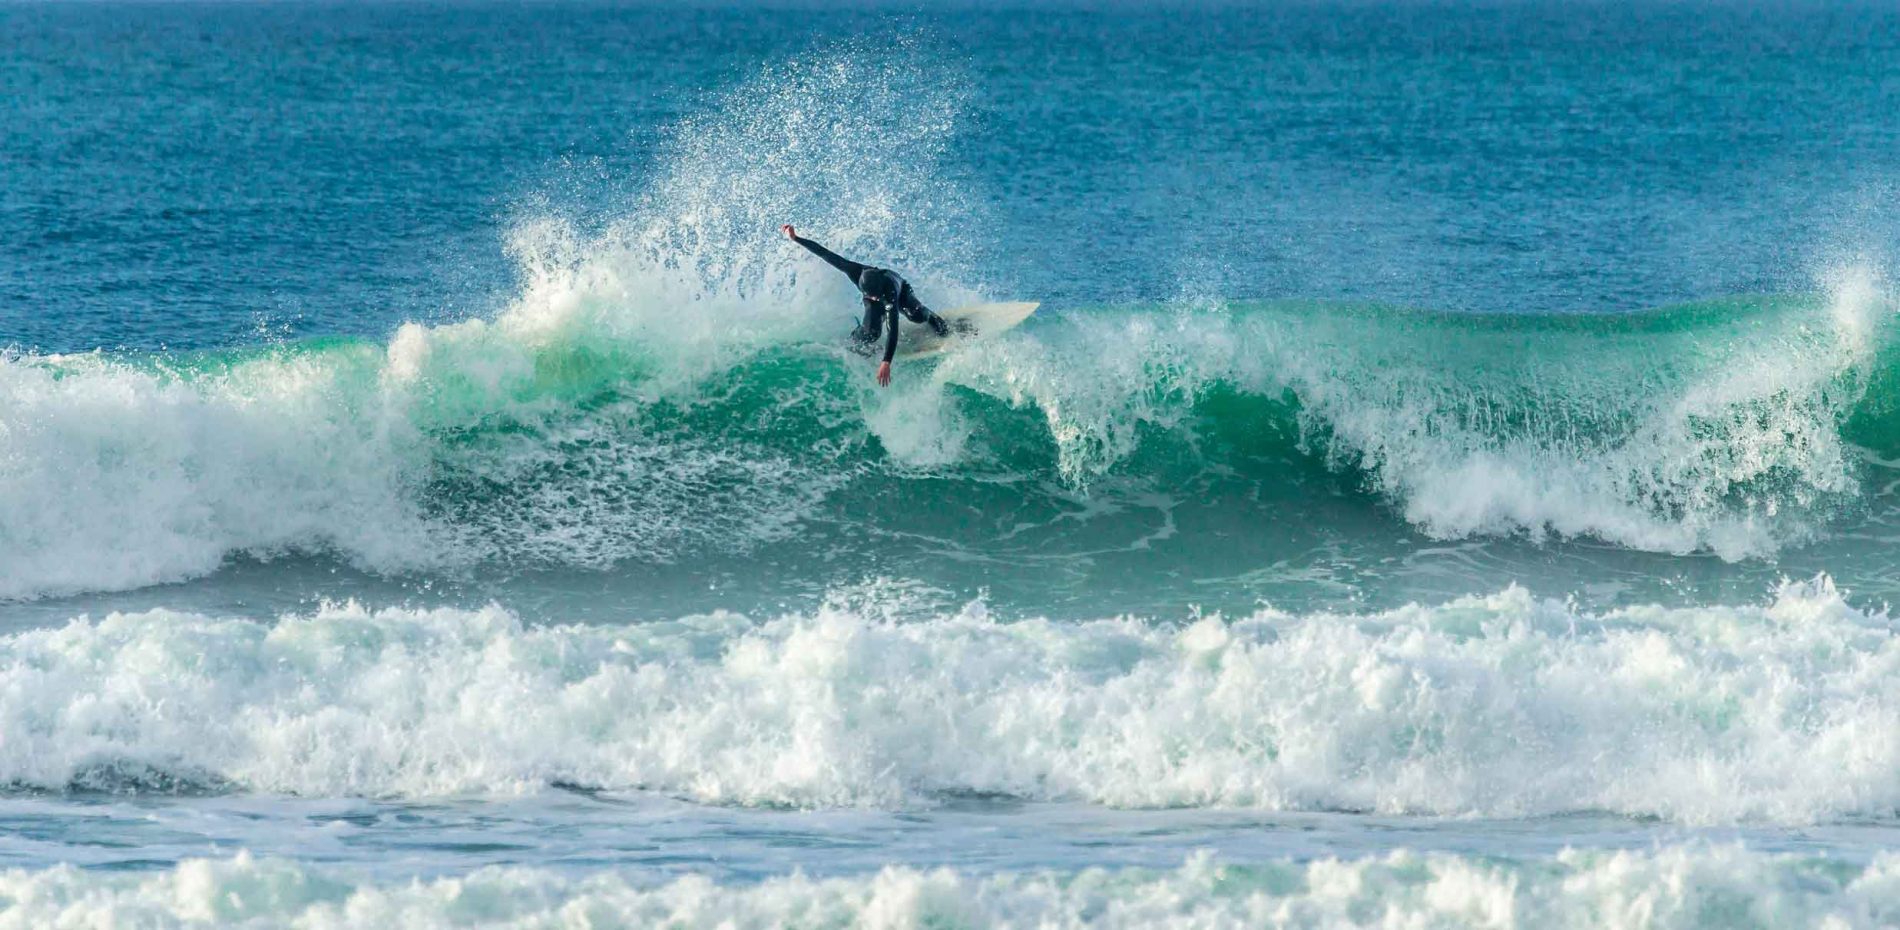 Surfer catching a nice wave